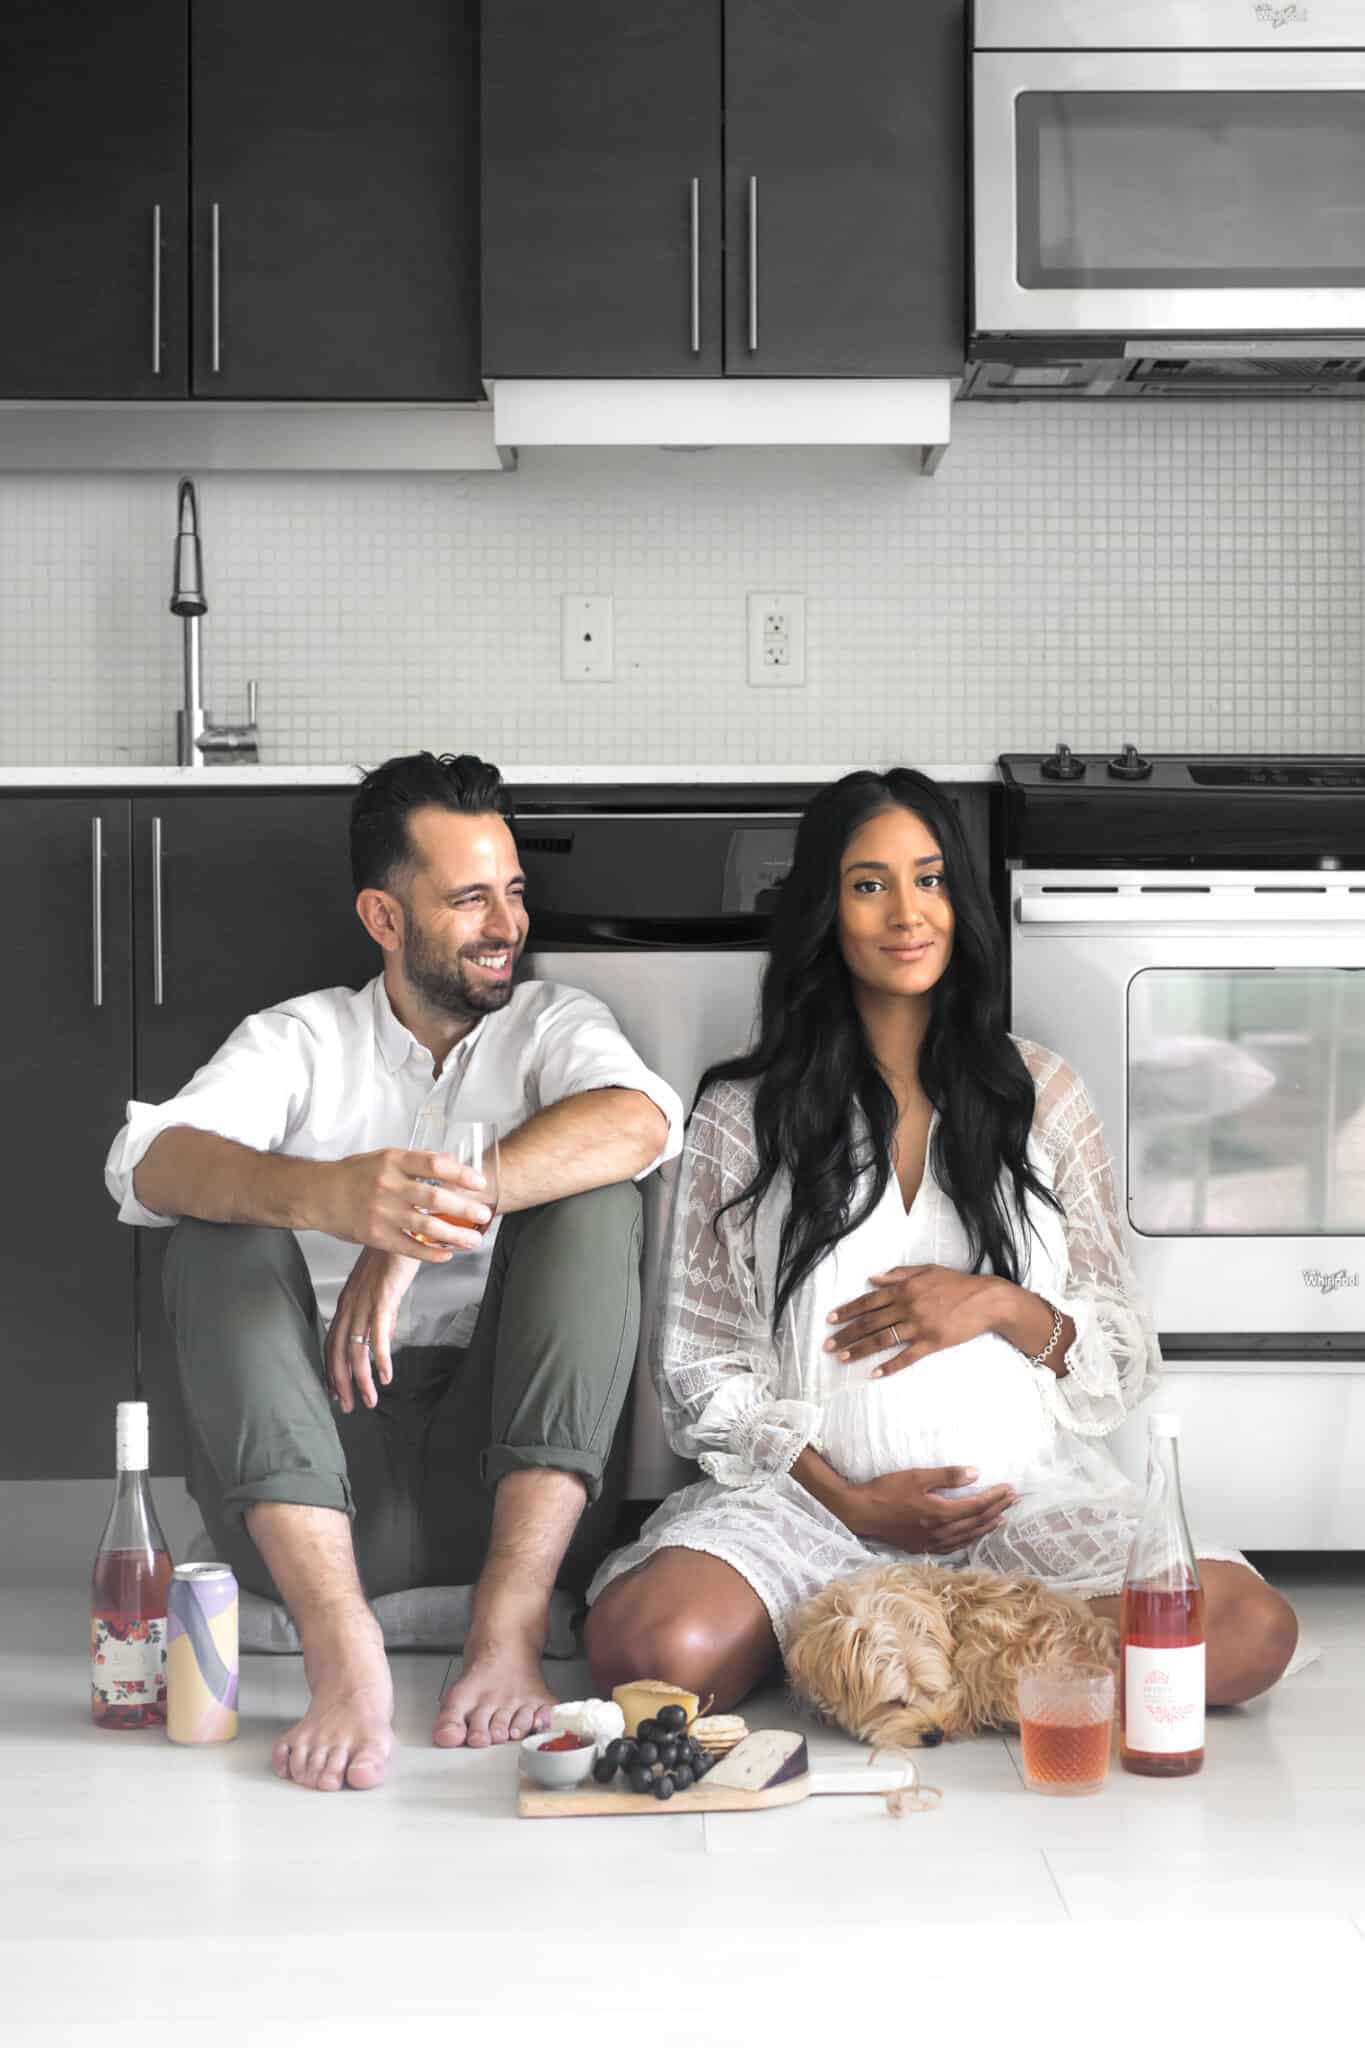 Philip Lago and Mystique Mattai of Chef Sous Chef | Interracial couple sitting on the floor with wine, cider, and cheeseboard.